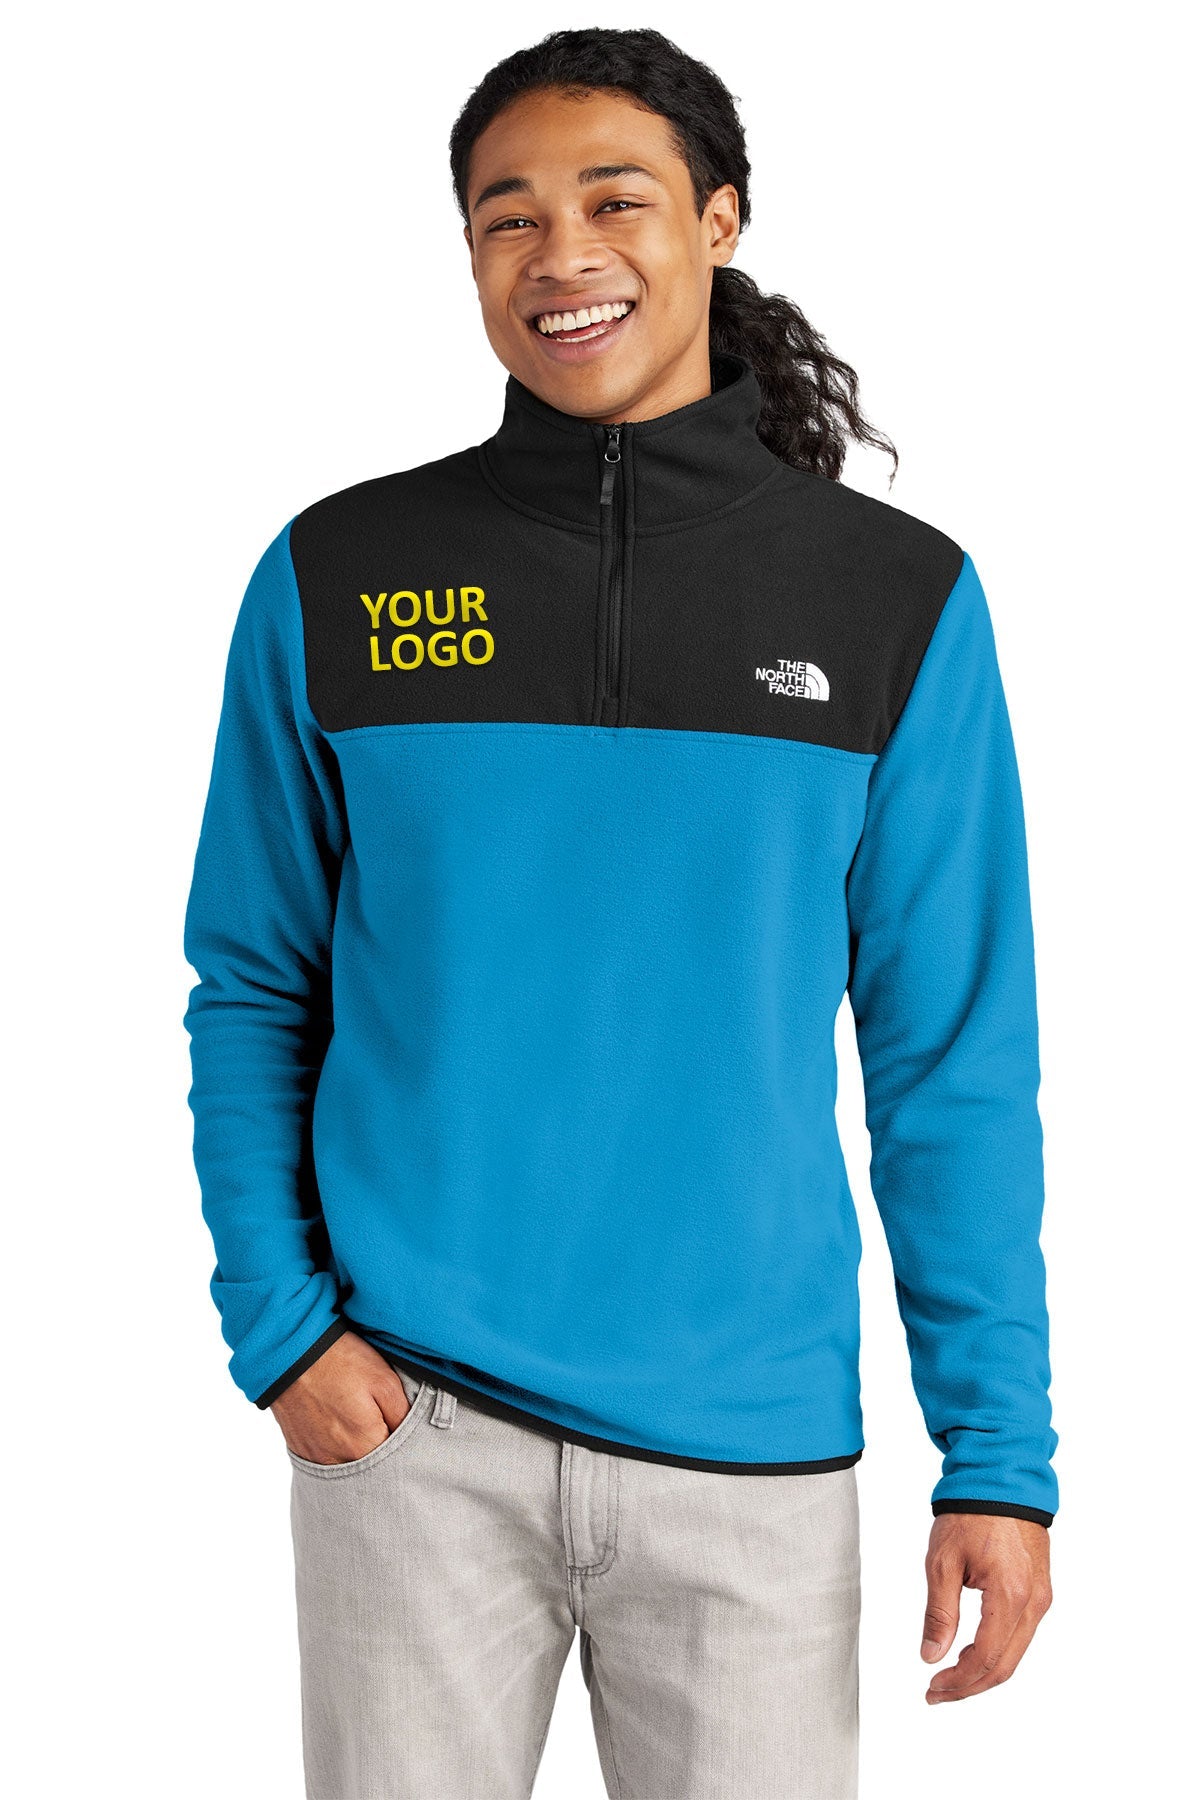 The North Face Hero Blue/ TNF Black NF0A7V4L business logo jackets